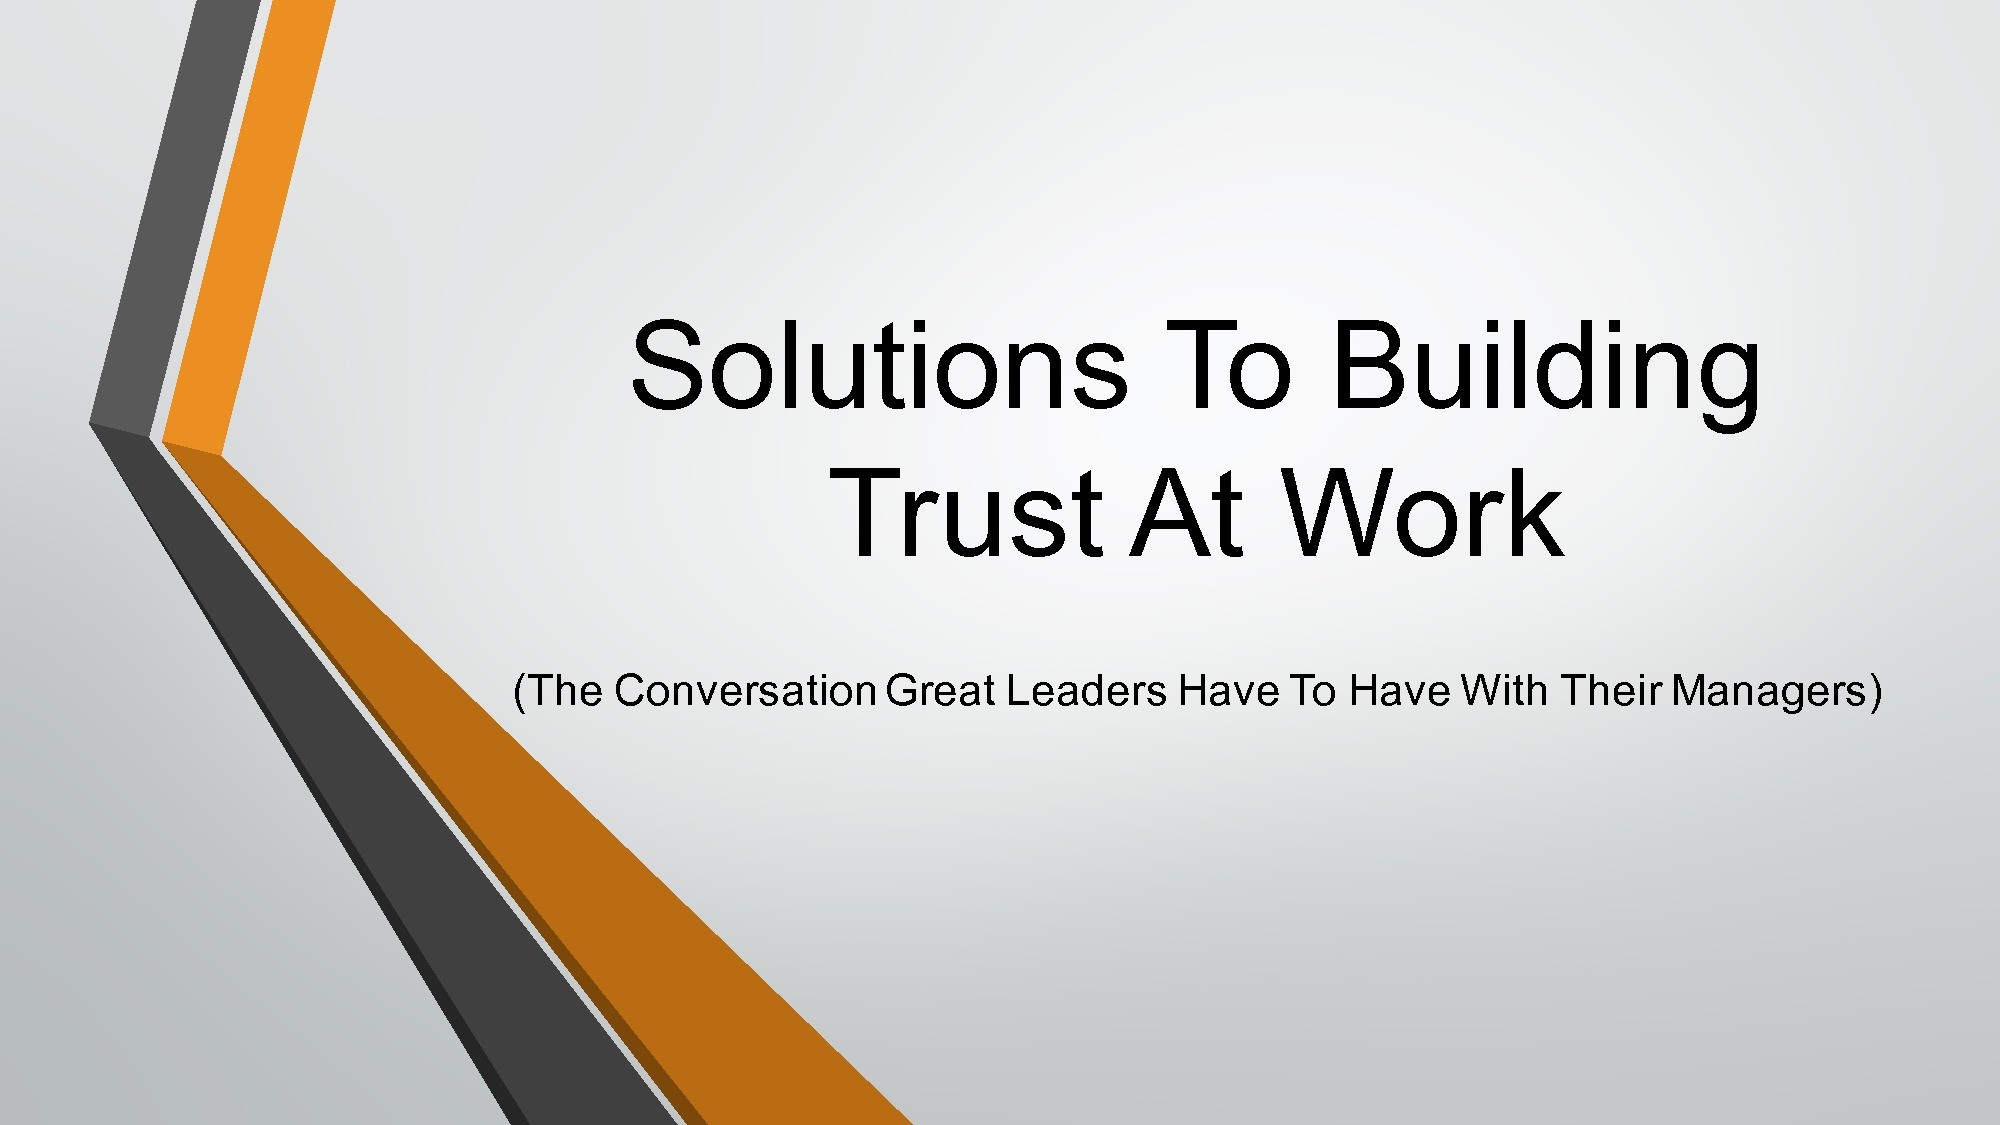 Solutions To Building Trust At Work